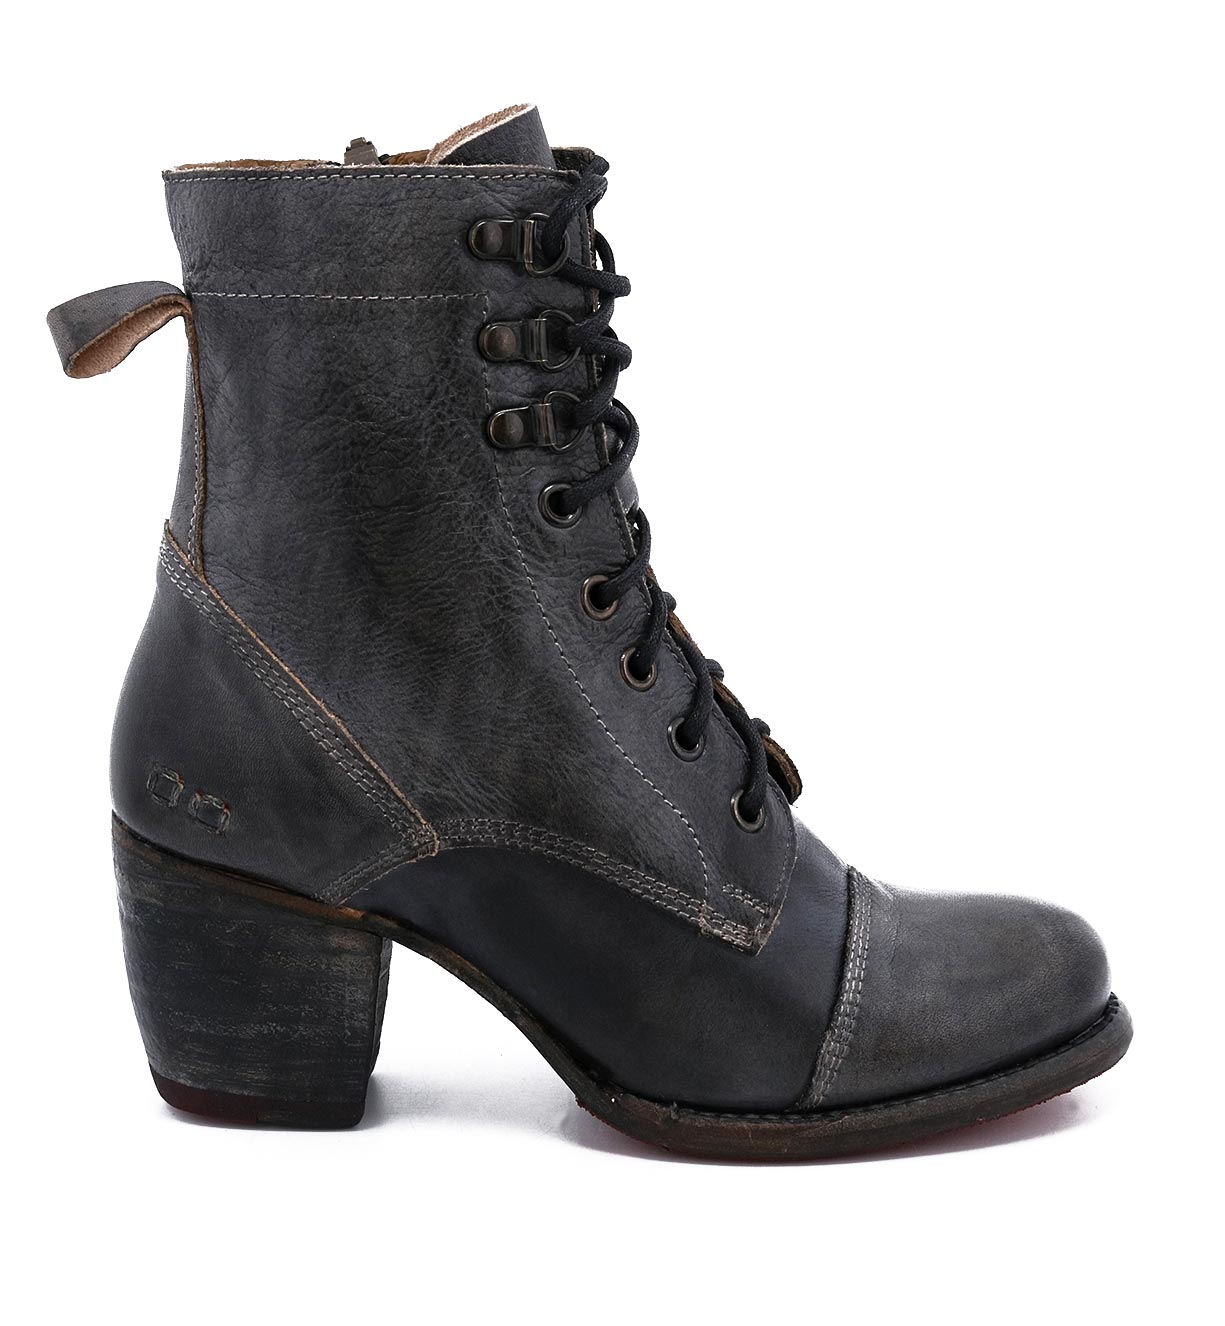 A women's black ankle boot with a wooden heel called "Judgement" from the brand Bed Stu.